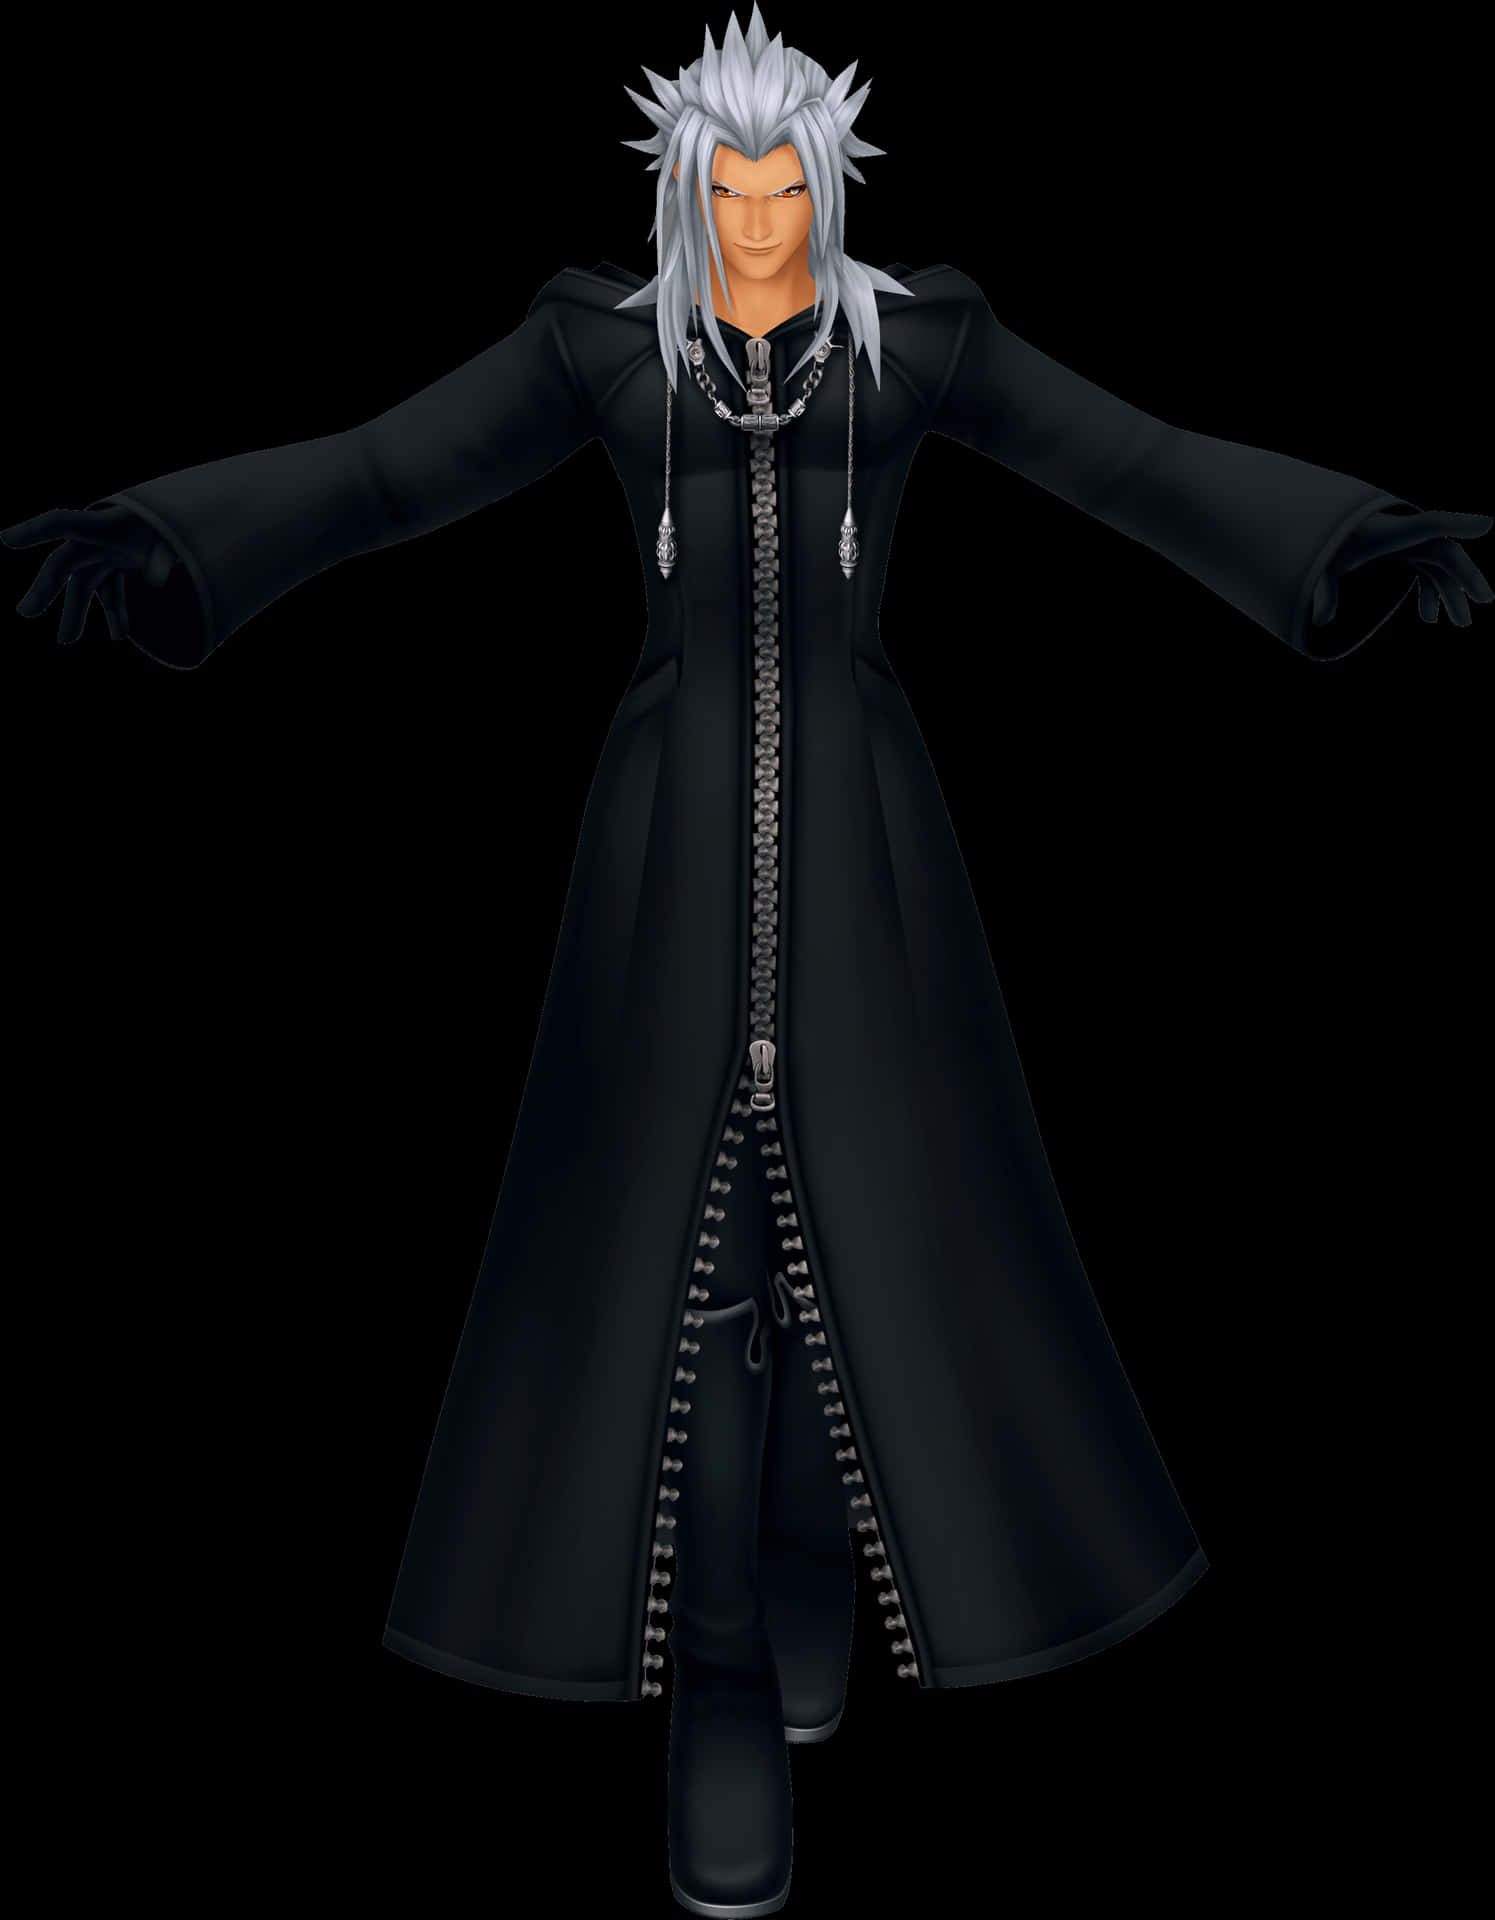 Caption: Xemnas, The Enigmatic Antagonist of Kingdom Hearts Wallpaper